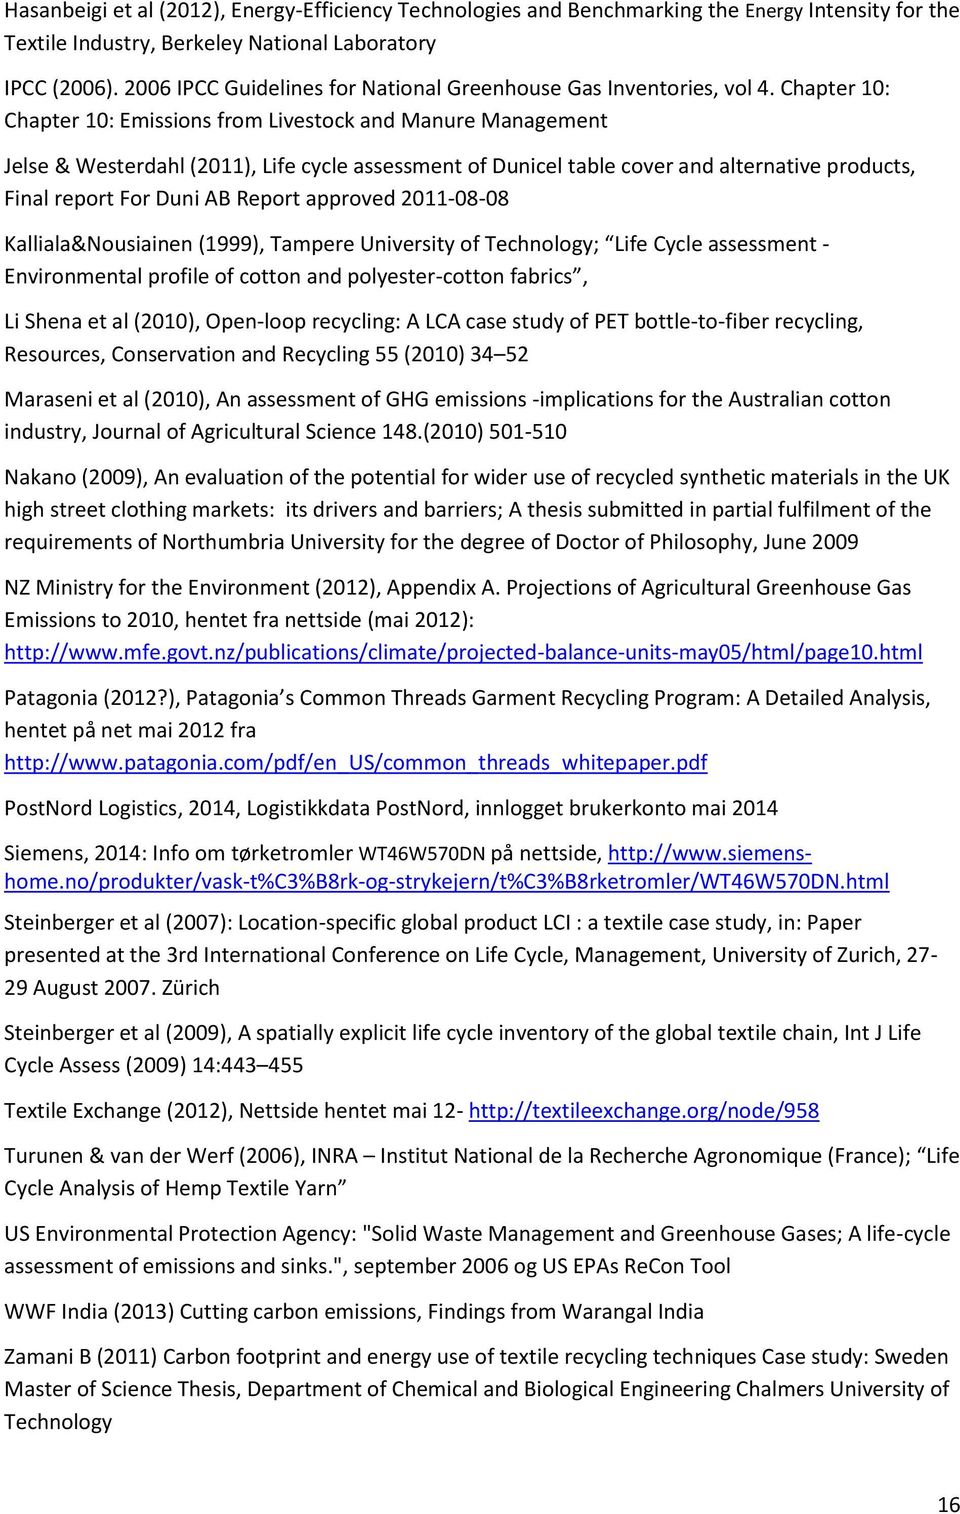 Chapter 10: Chapter 10: Emissions from Livestock and Manure Management Jelse & Westerdahl (2011), Life cycle assessment of Dunicel table cover and alternative products, Final report For Duni AB